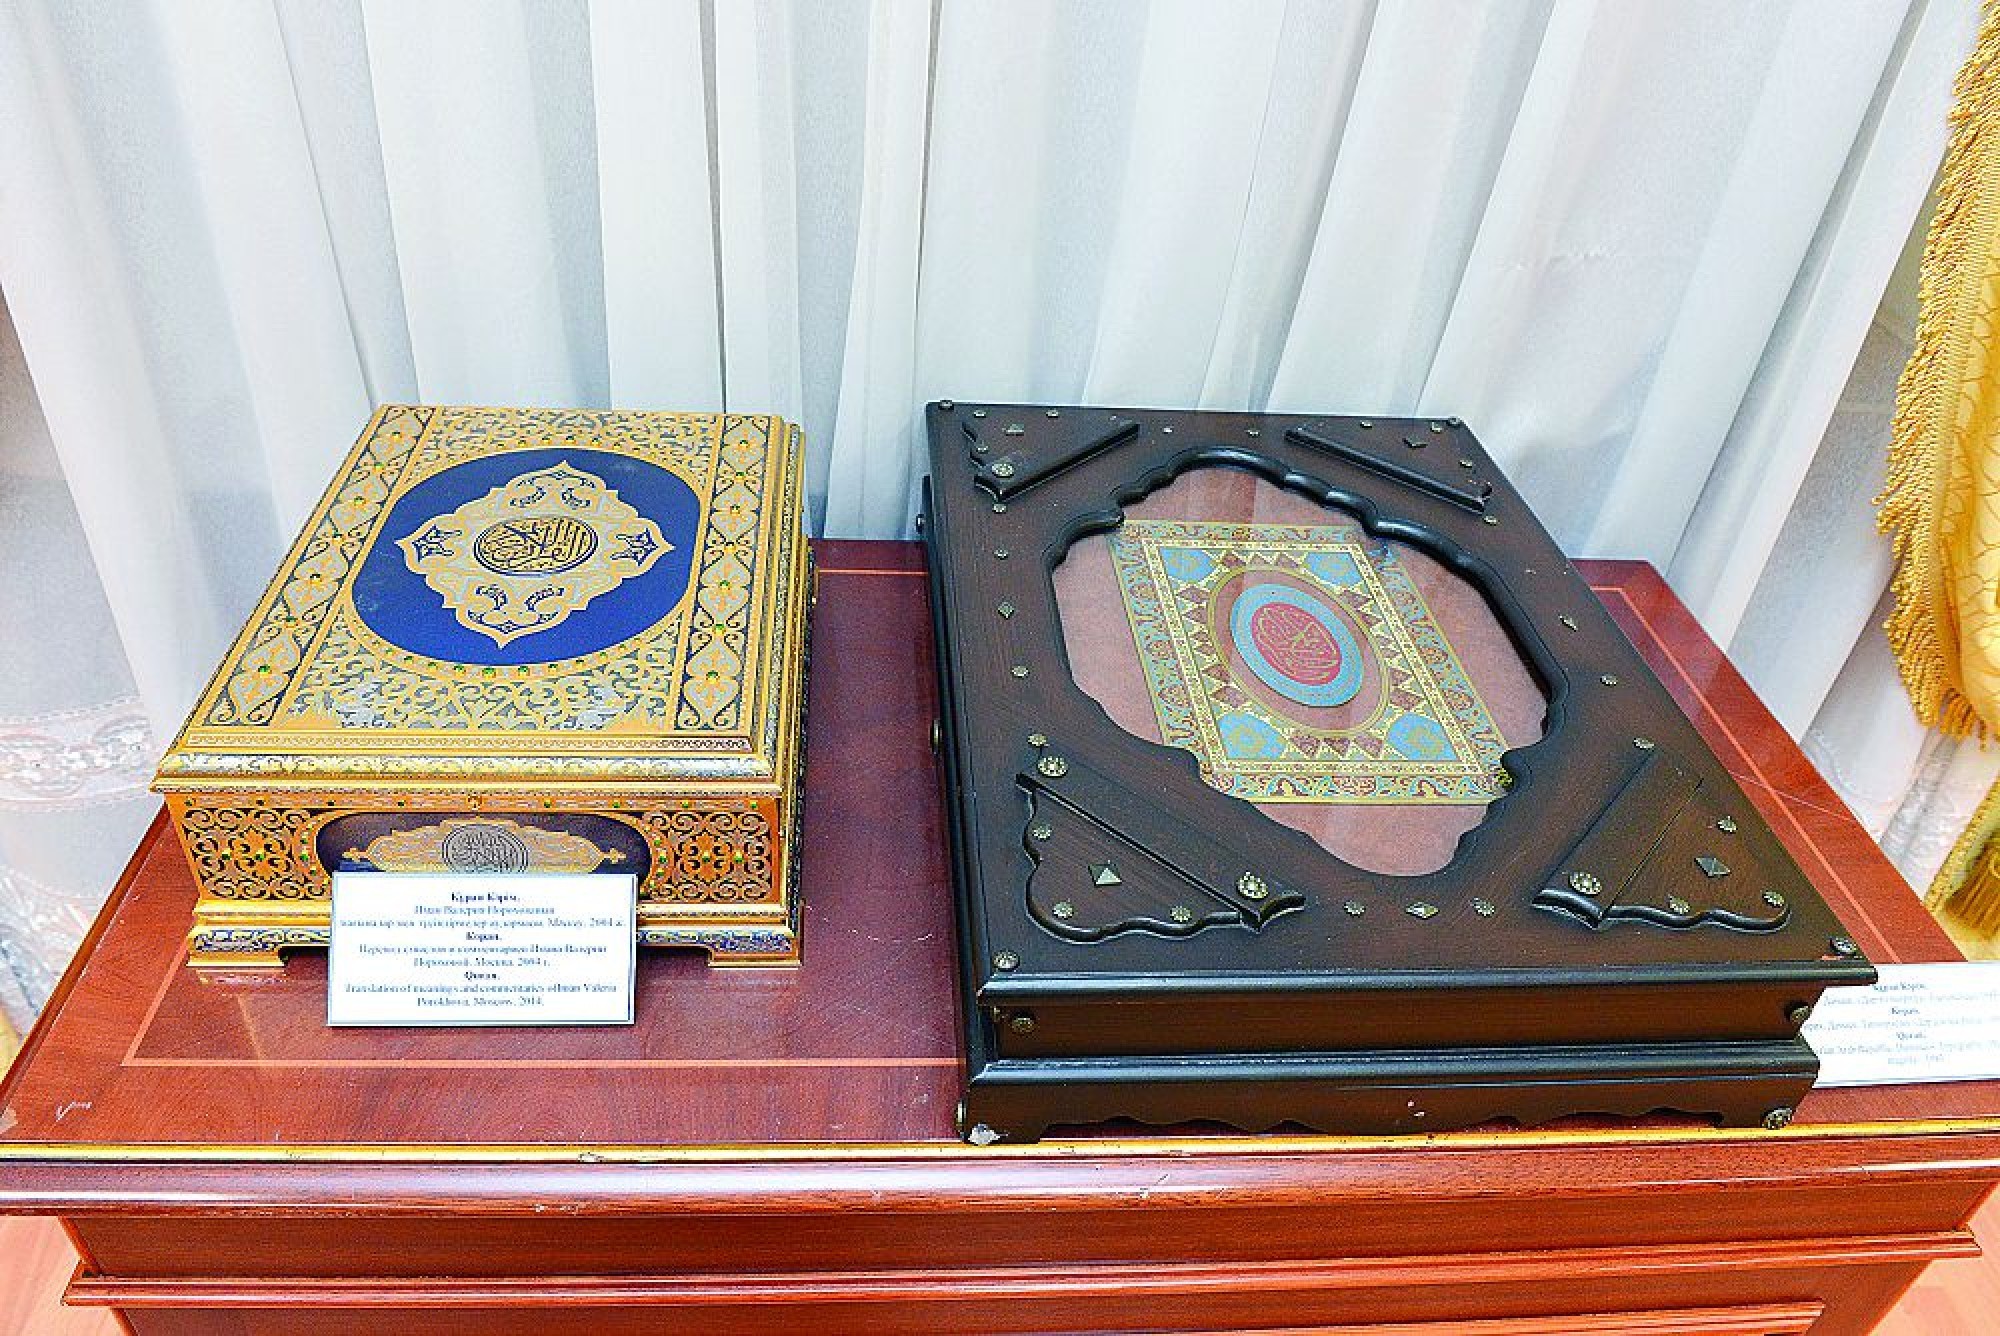 Exhibition of Holy Quran Books starts in Astana